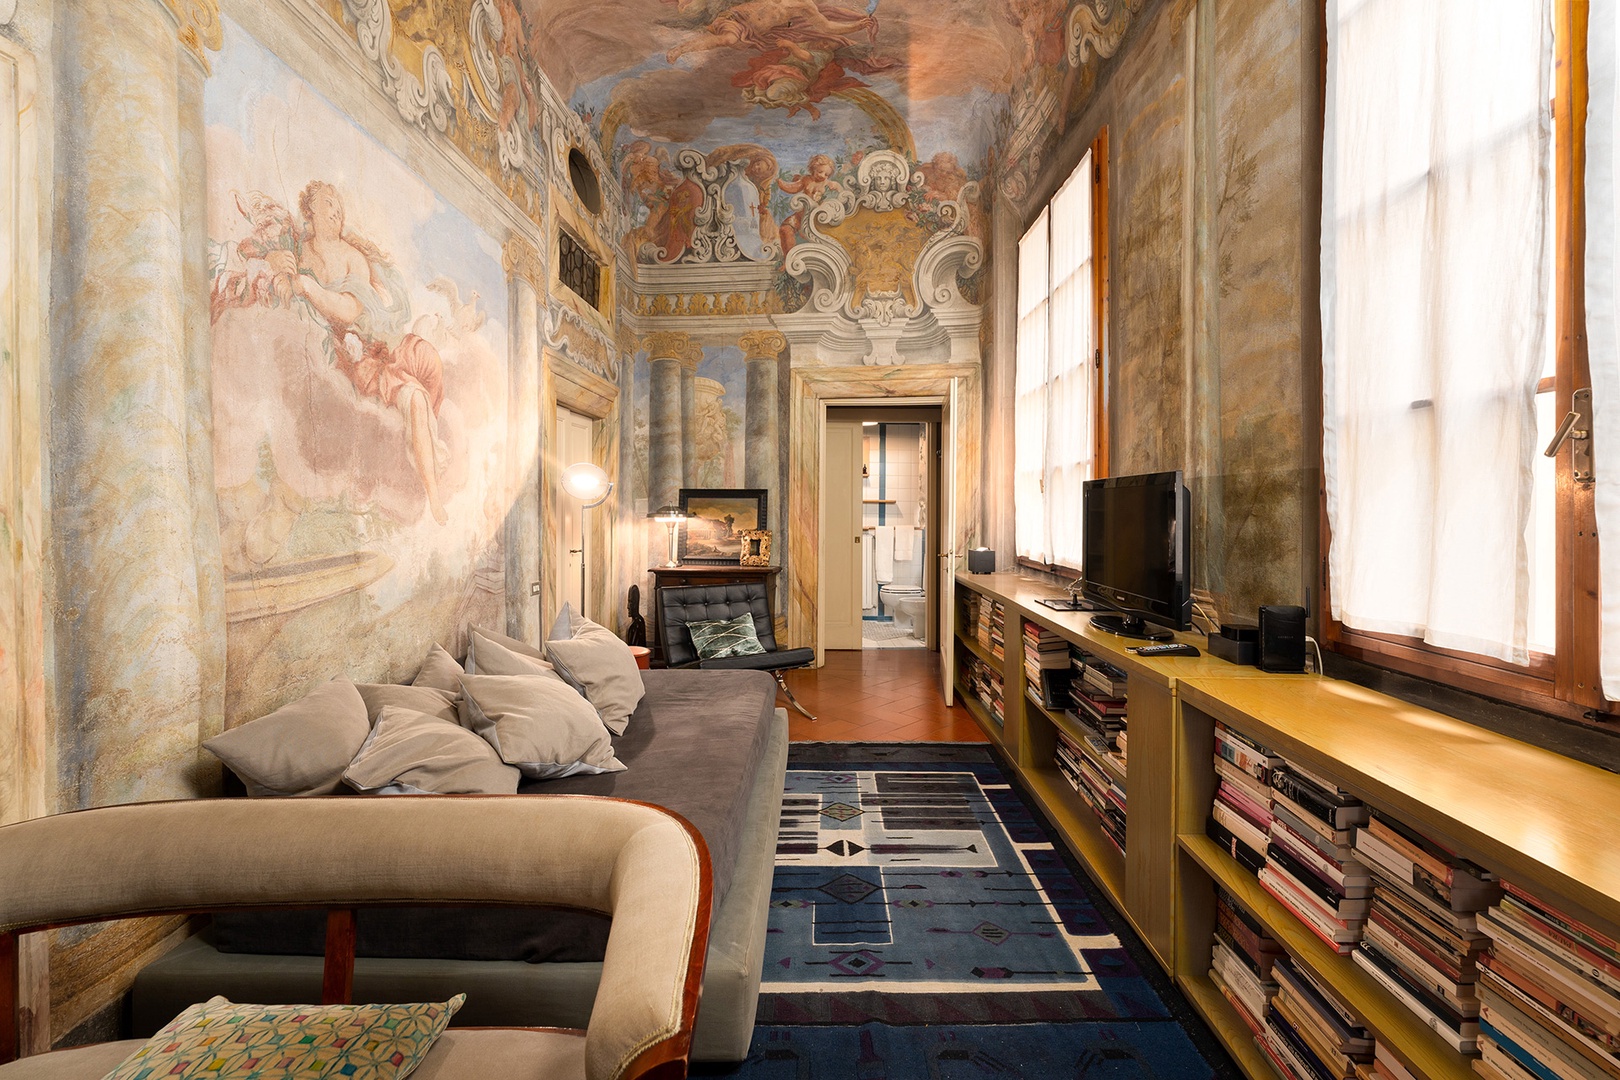 The study glows with bright frescoes.